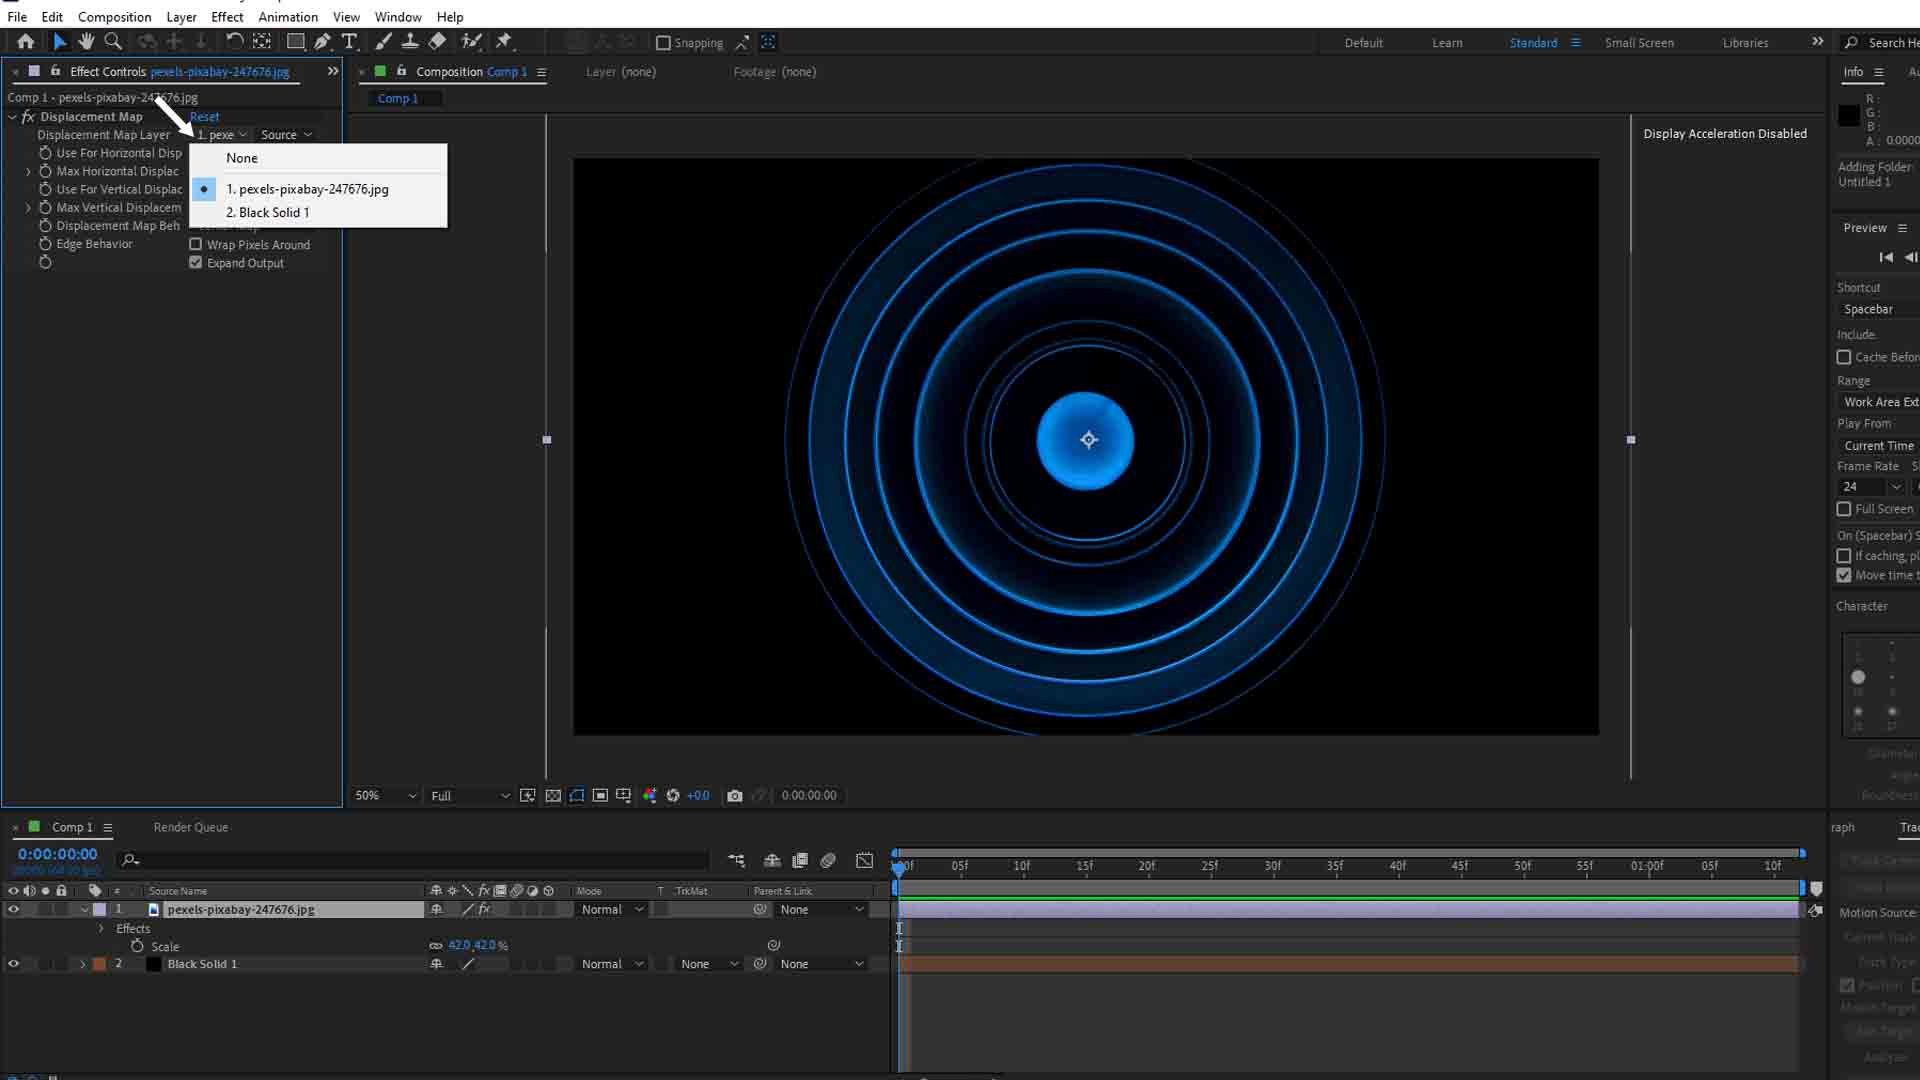 Displacement map properties in Adobe after effects